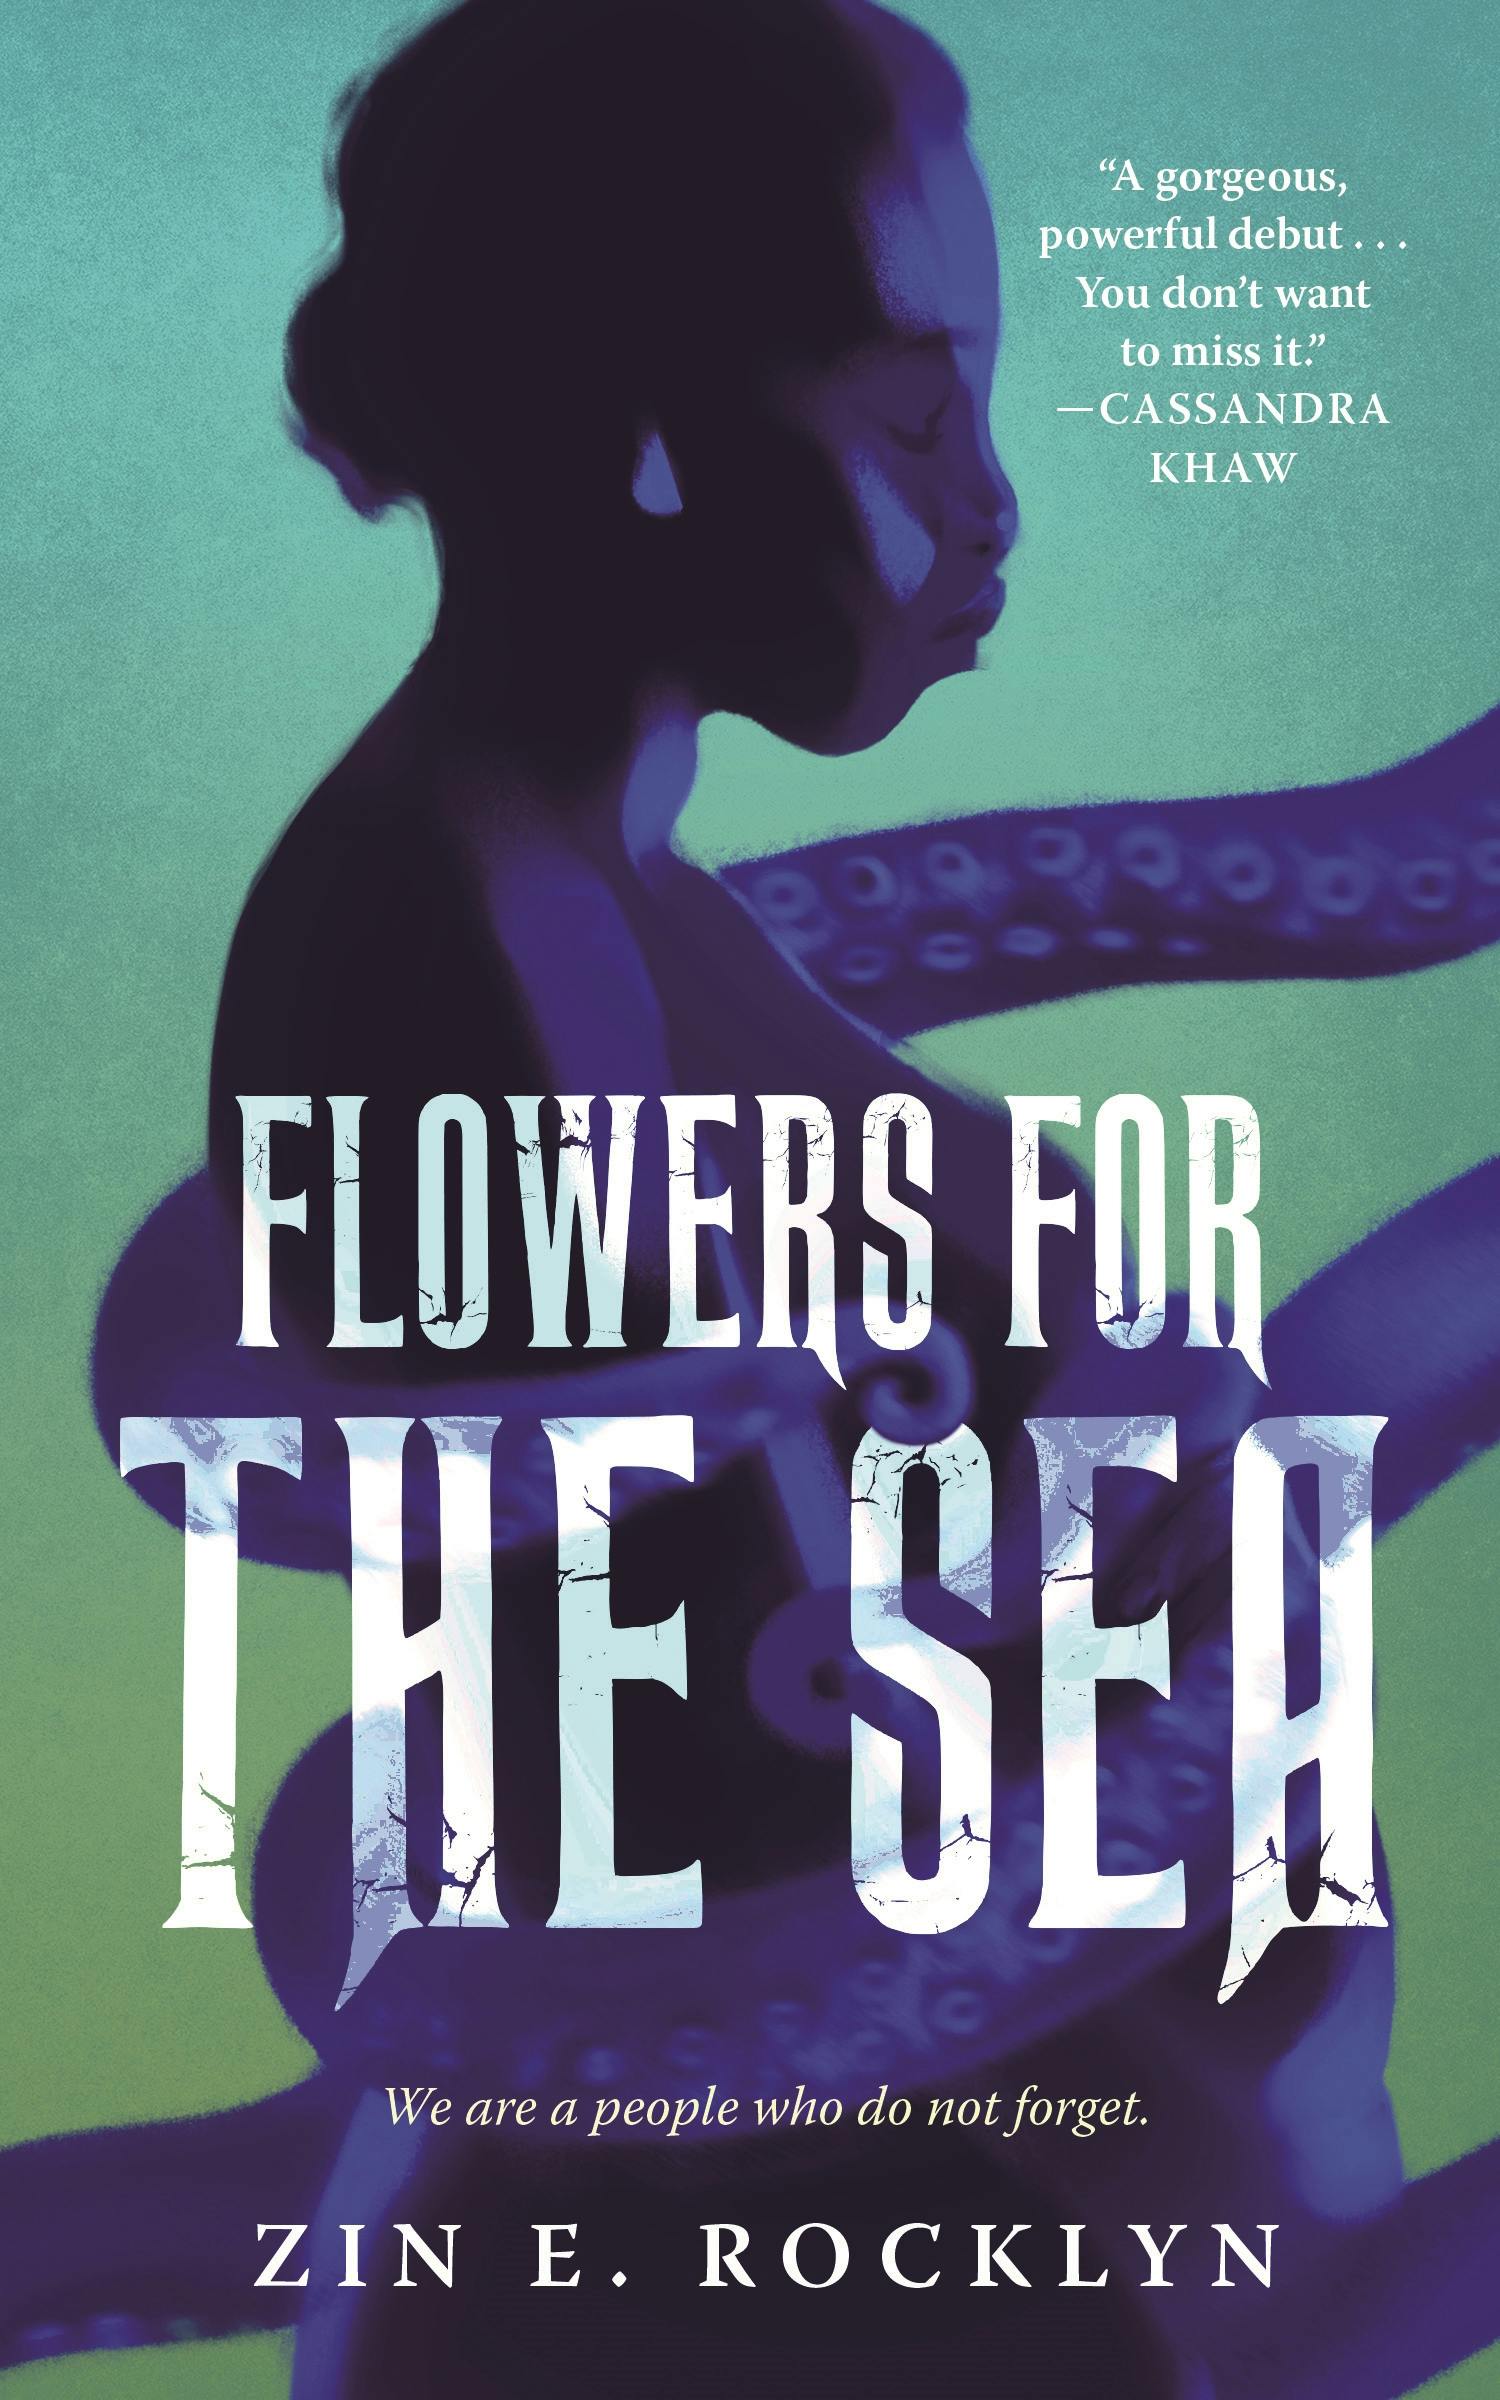 Cover for the book titled as: Flowers for the Sea